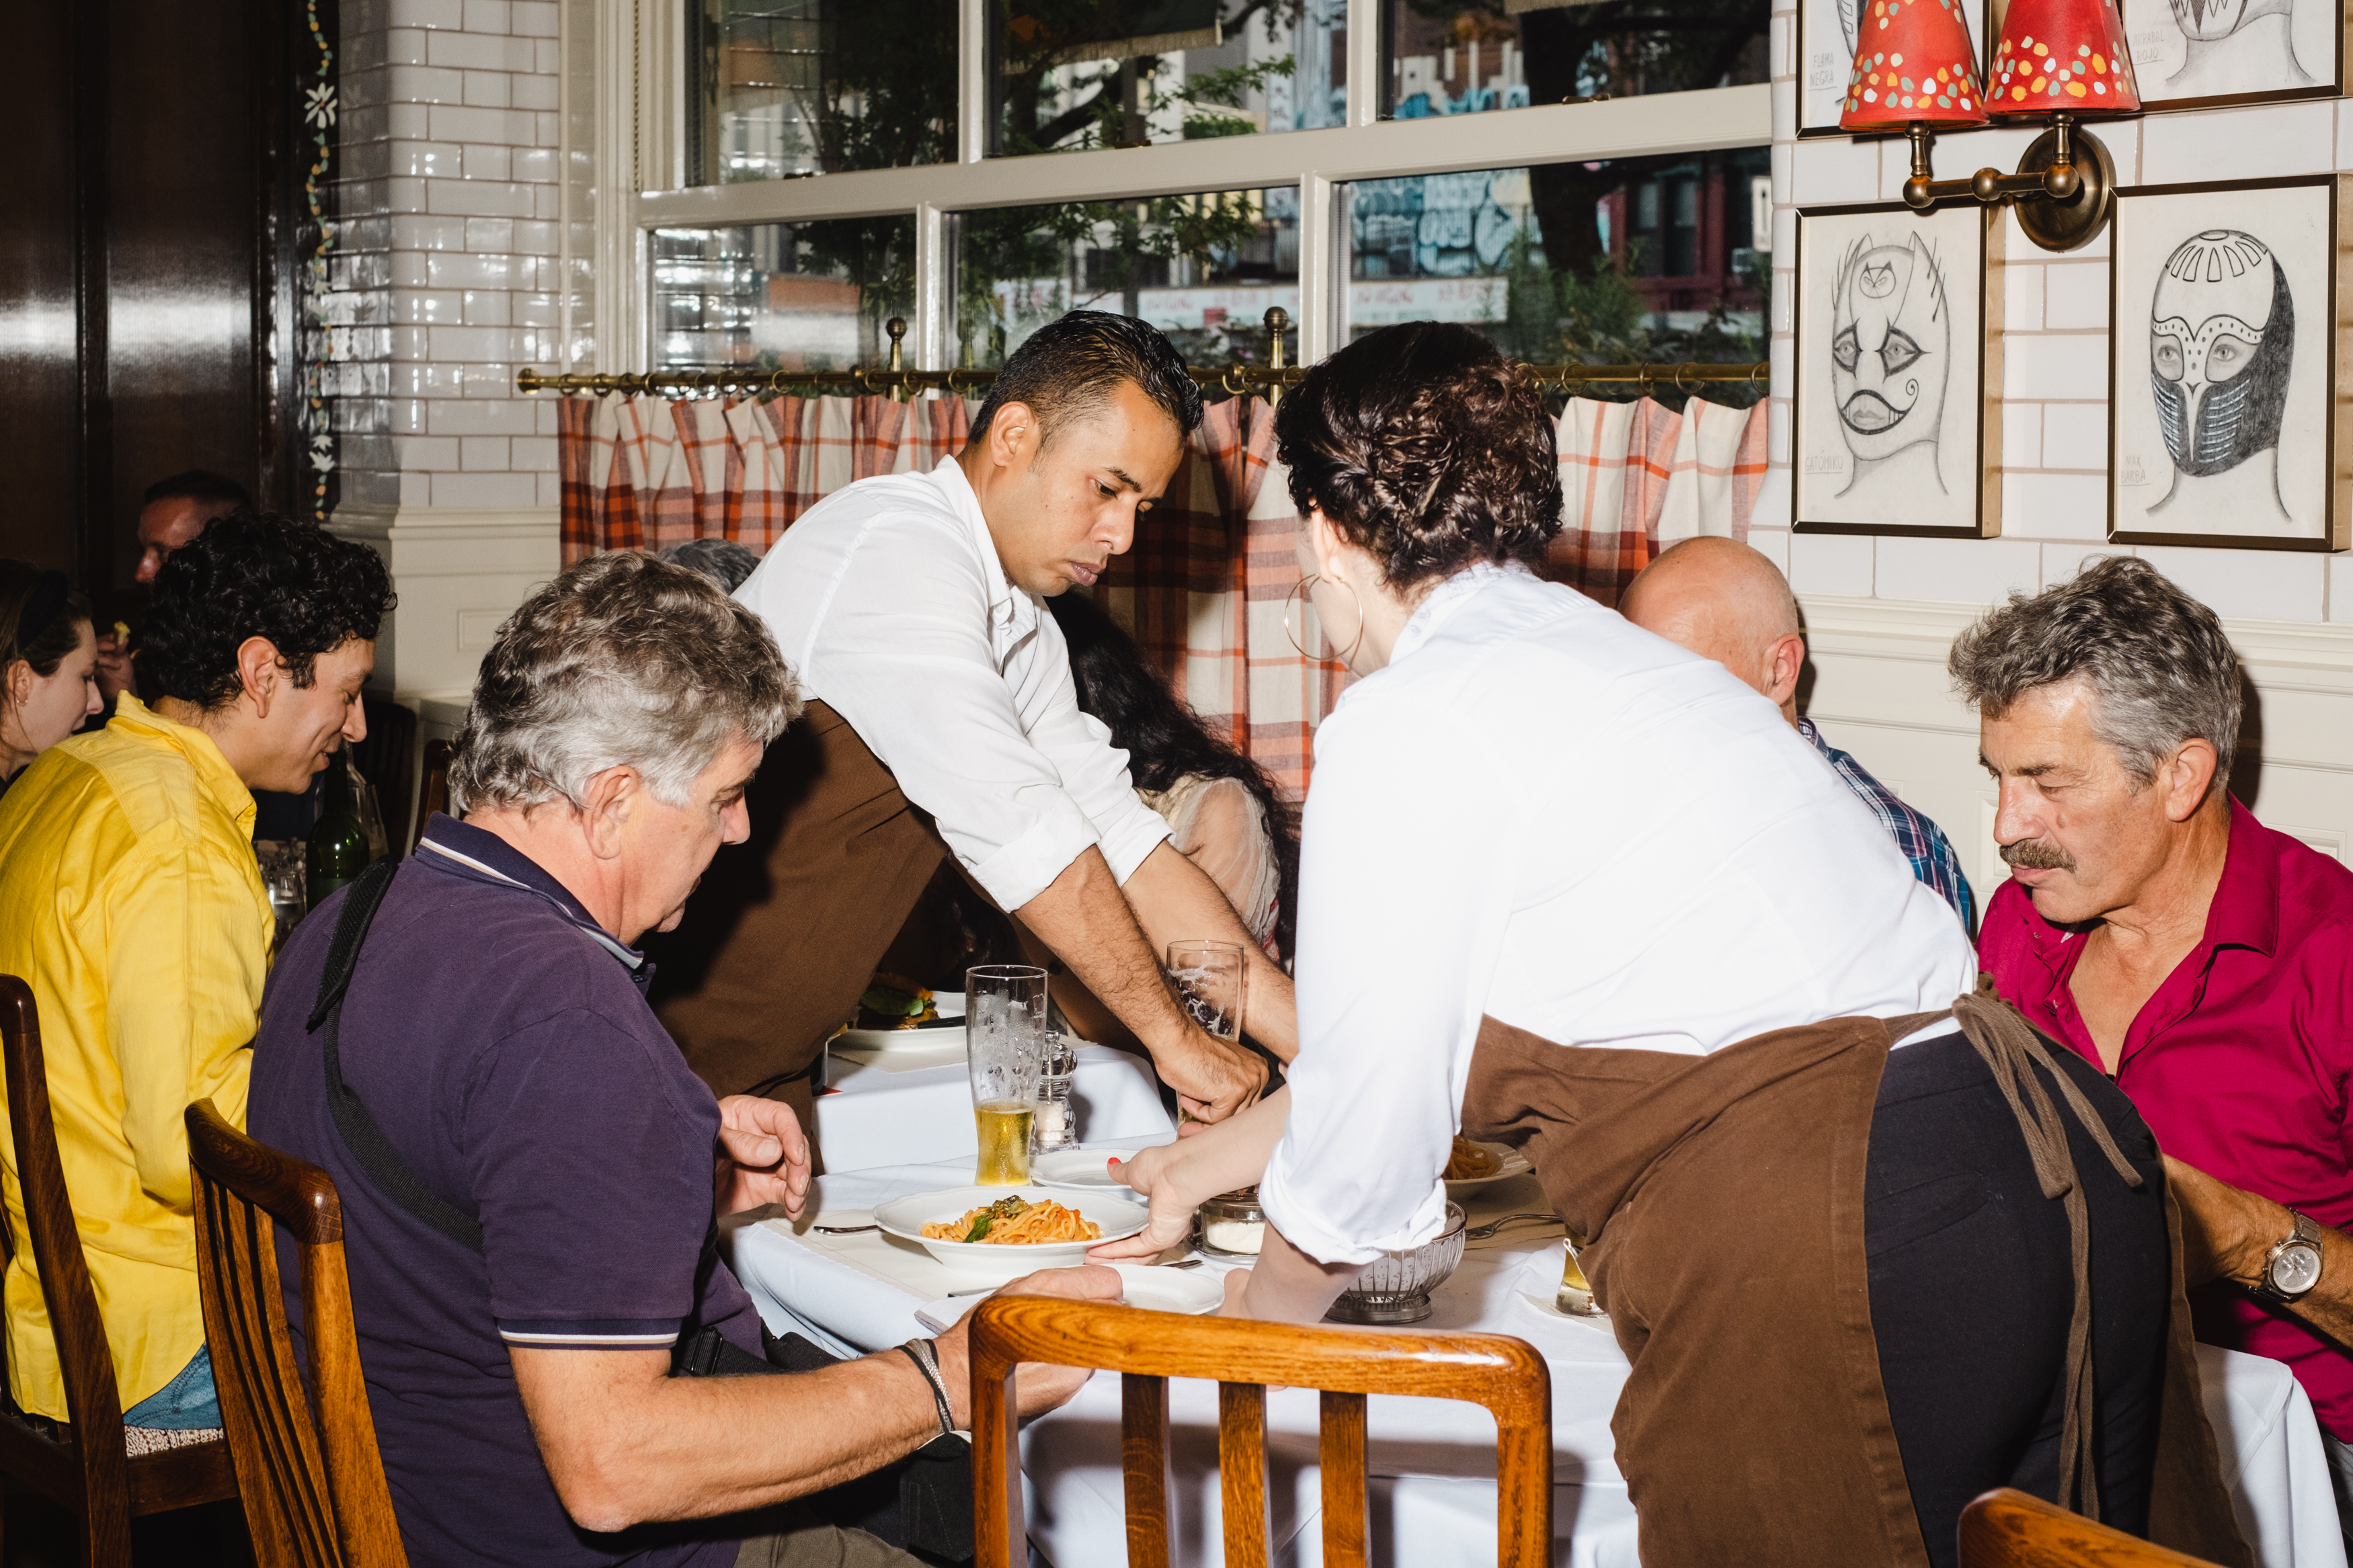 Staffers in white shirts and brown aprons serve spaghetti pomodoro to a table at Corner Bar.